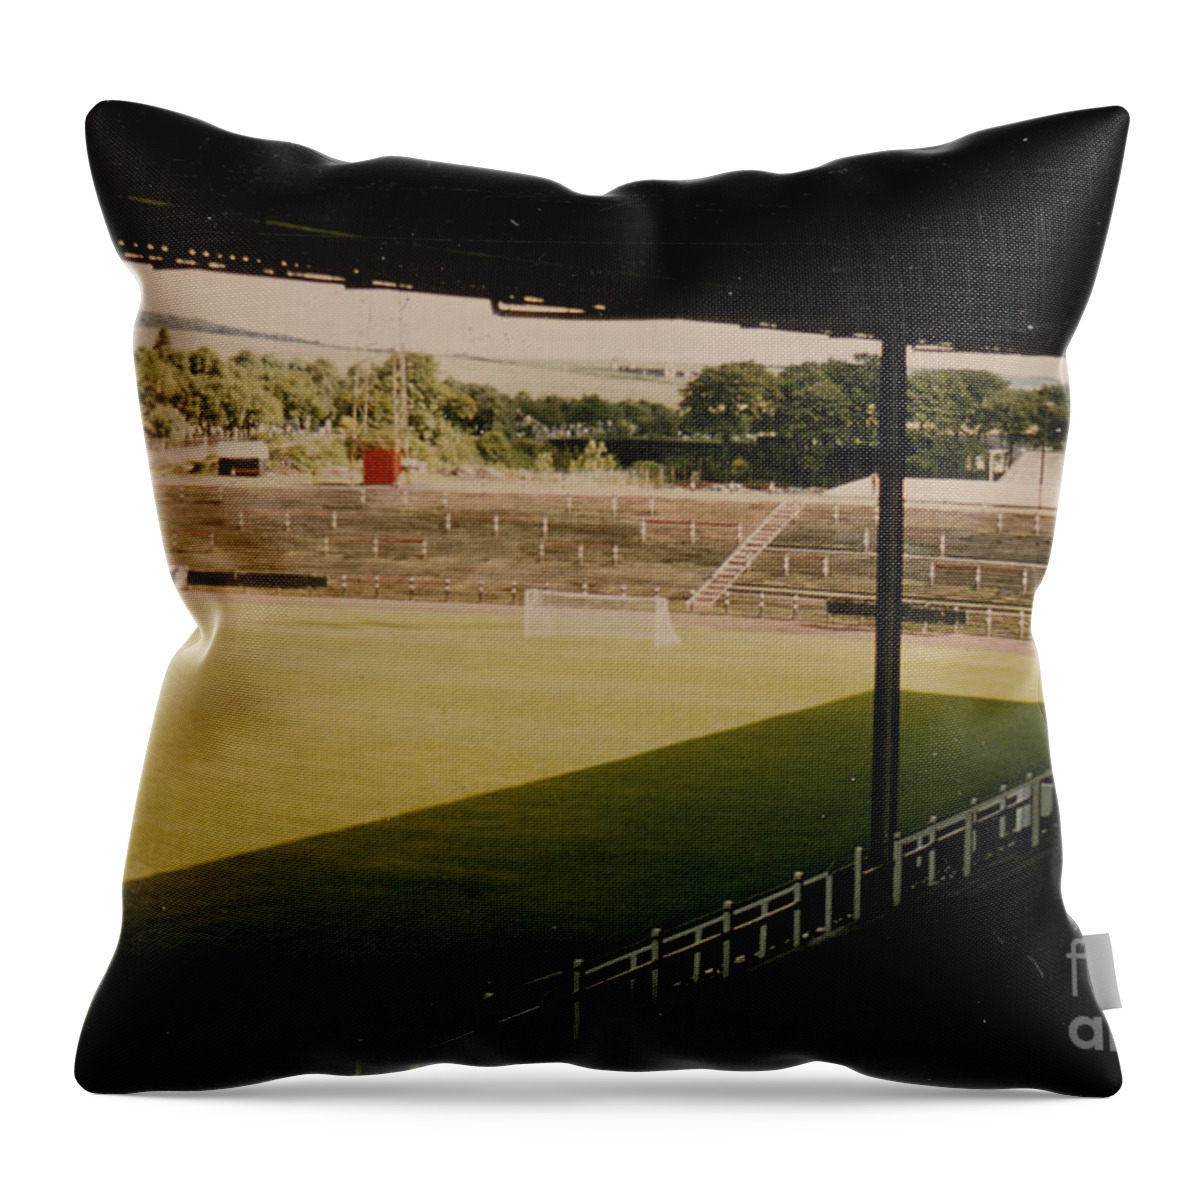  Throw Pillow featuring the photograph Dunfermline Athletic - East End Park - East End 1 - 1980s by Legendary Football Grounds